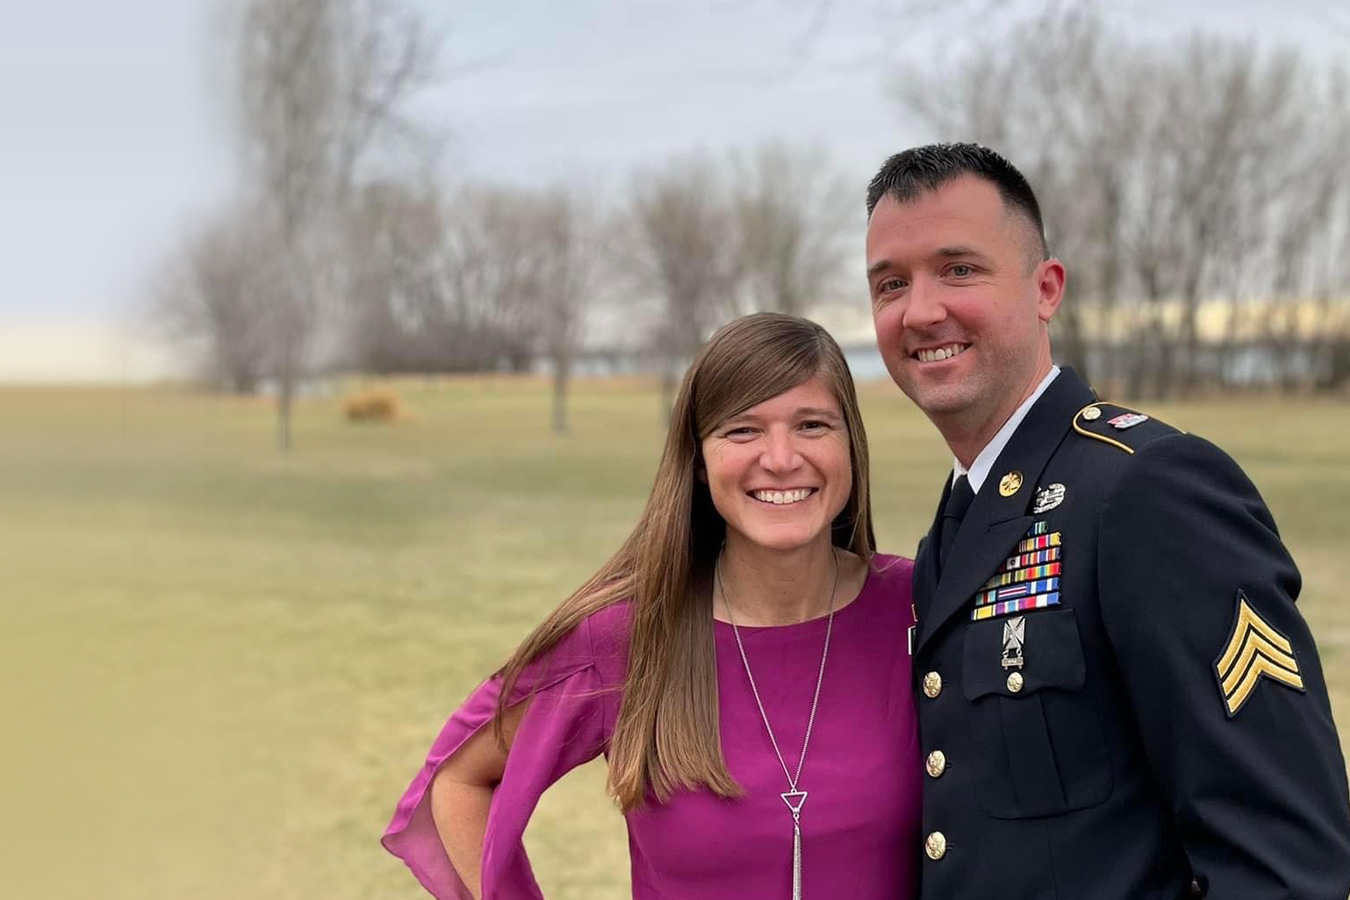 Austin Slaughter, DSU’s Veteran Affairs Director, helps student-veterans and their families utilize their education benefits towards a successful career